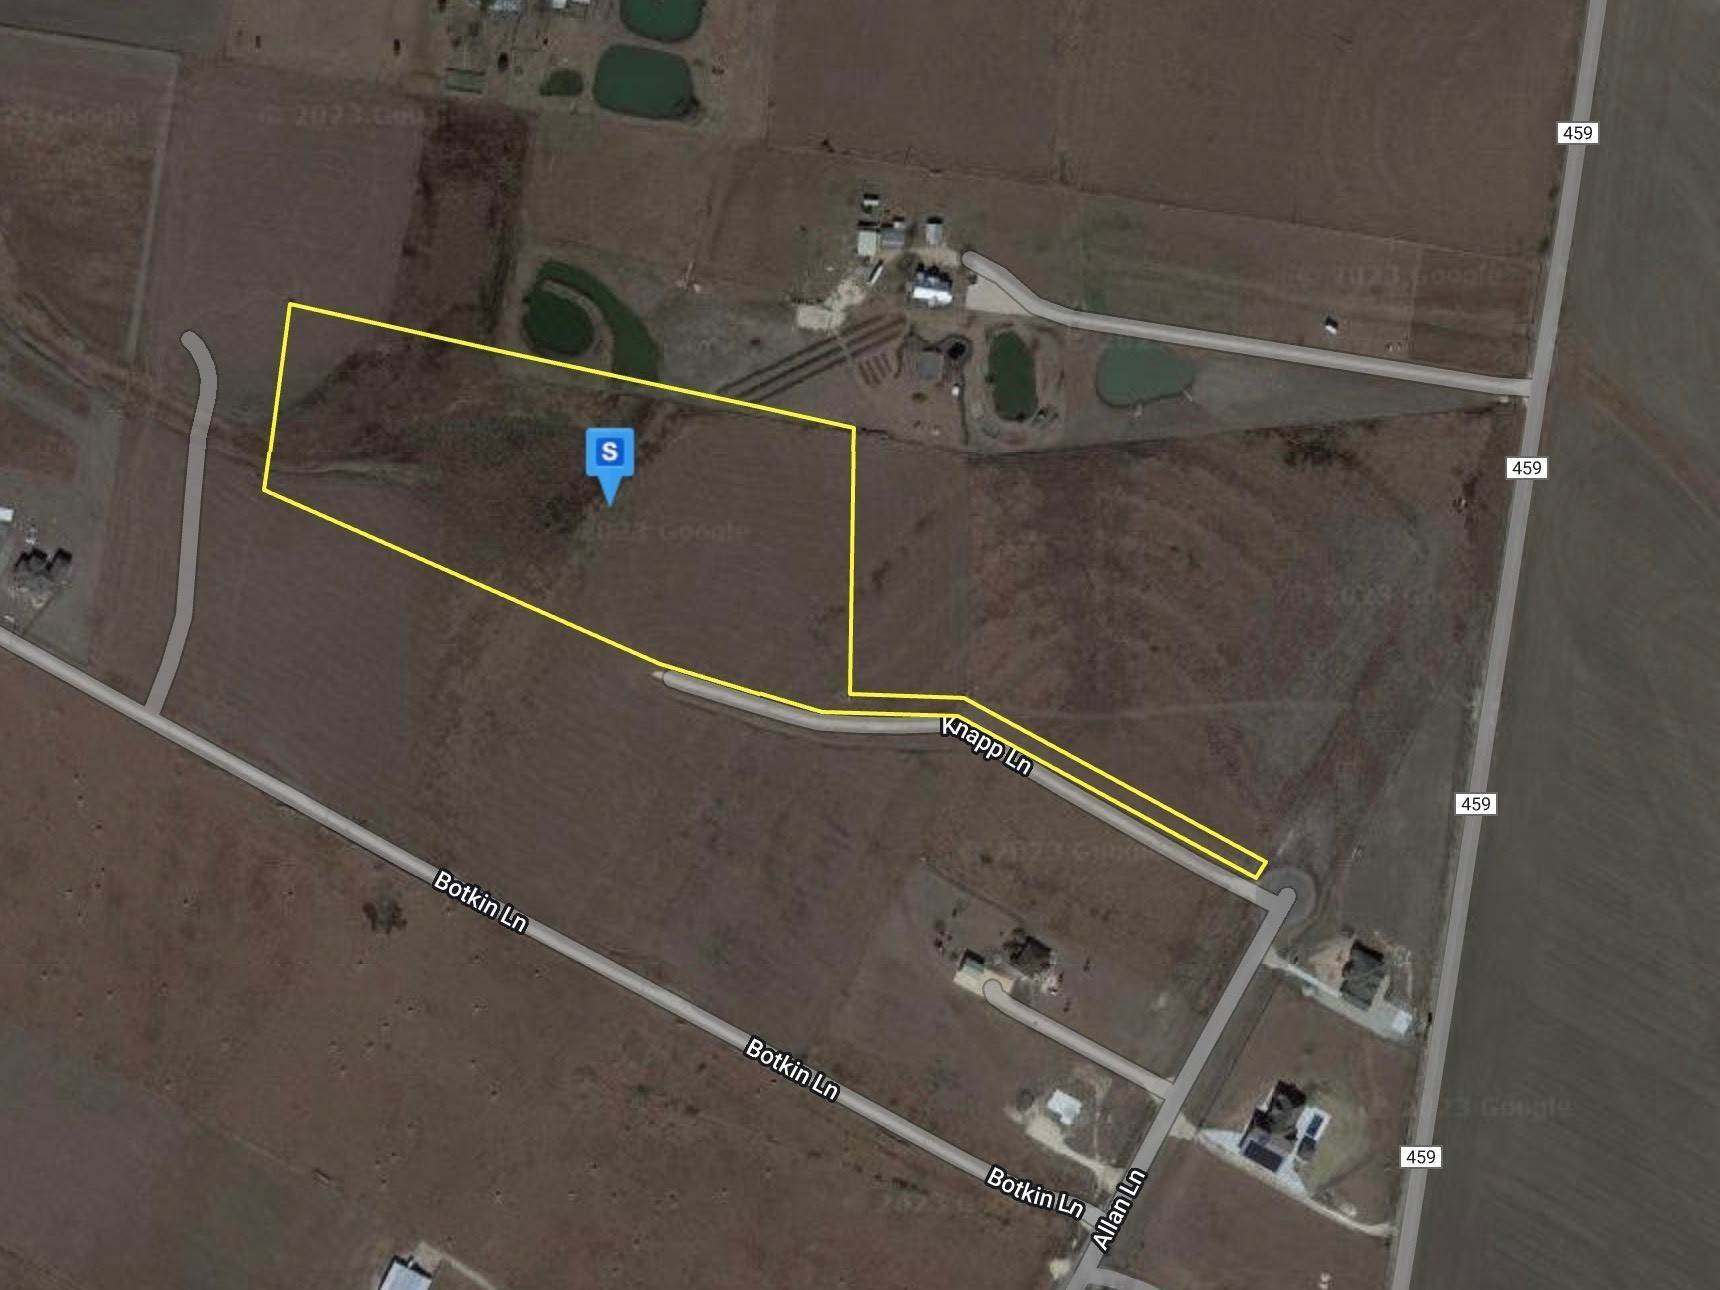 Land for Sale at Coupland, TX 78615